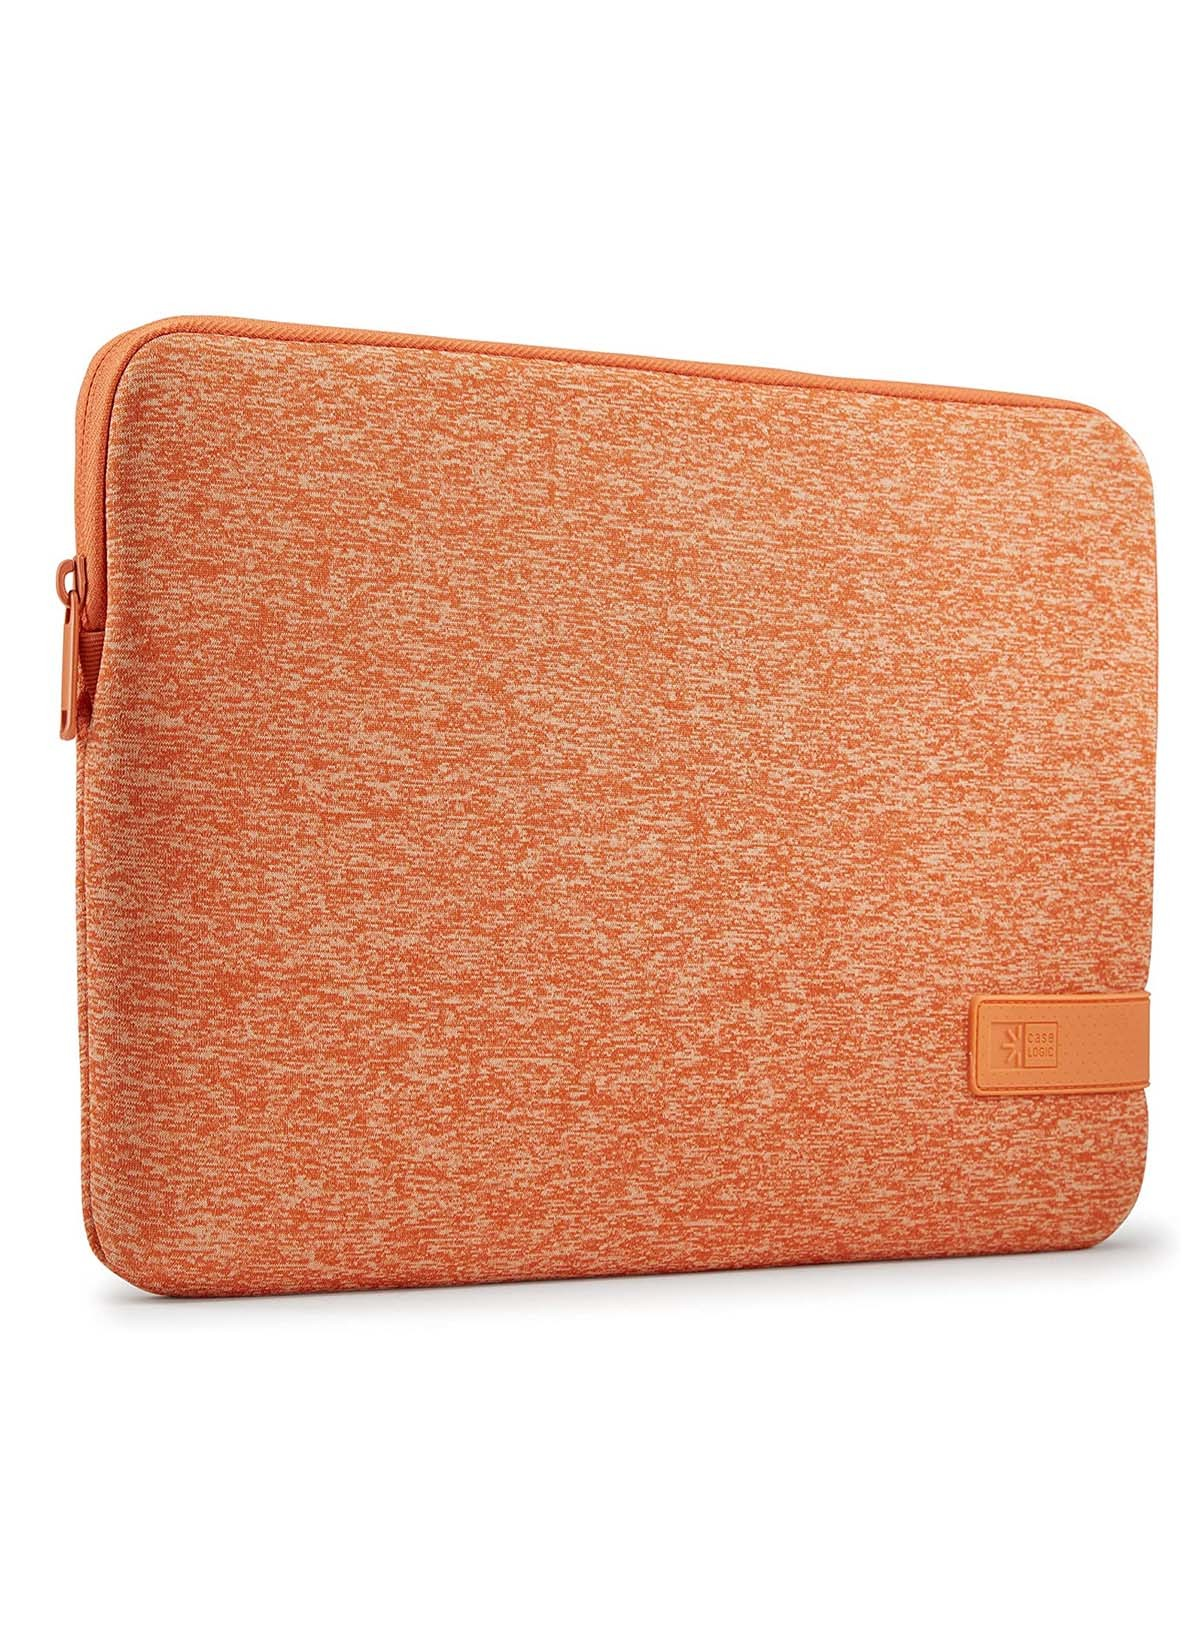 Polyester, Reflect LOGIC Universal für Gold/Apricot Coral Notebooksleeve Sleeve CASE